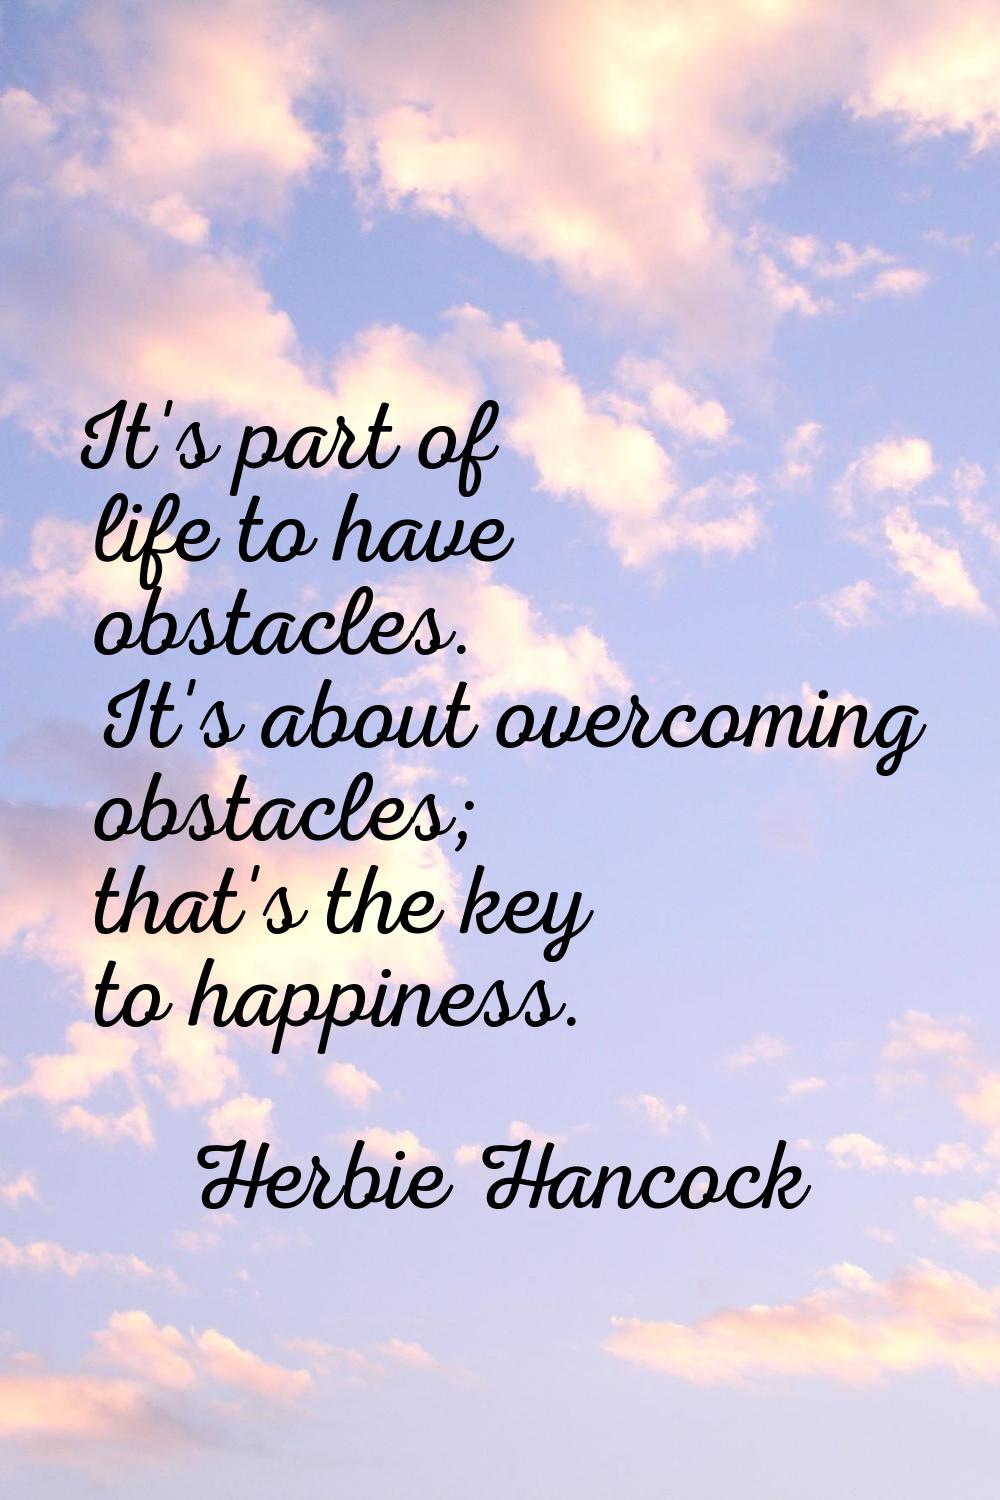 It's part of life to have obstacles. It's about overcoming obstacles; that's the key to happiness.